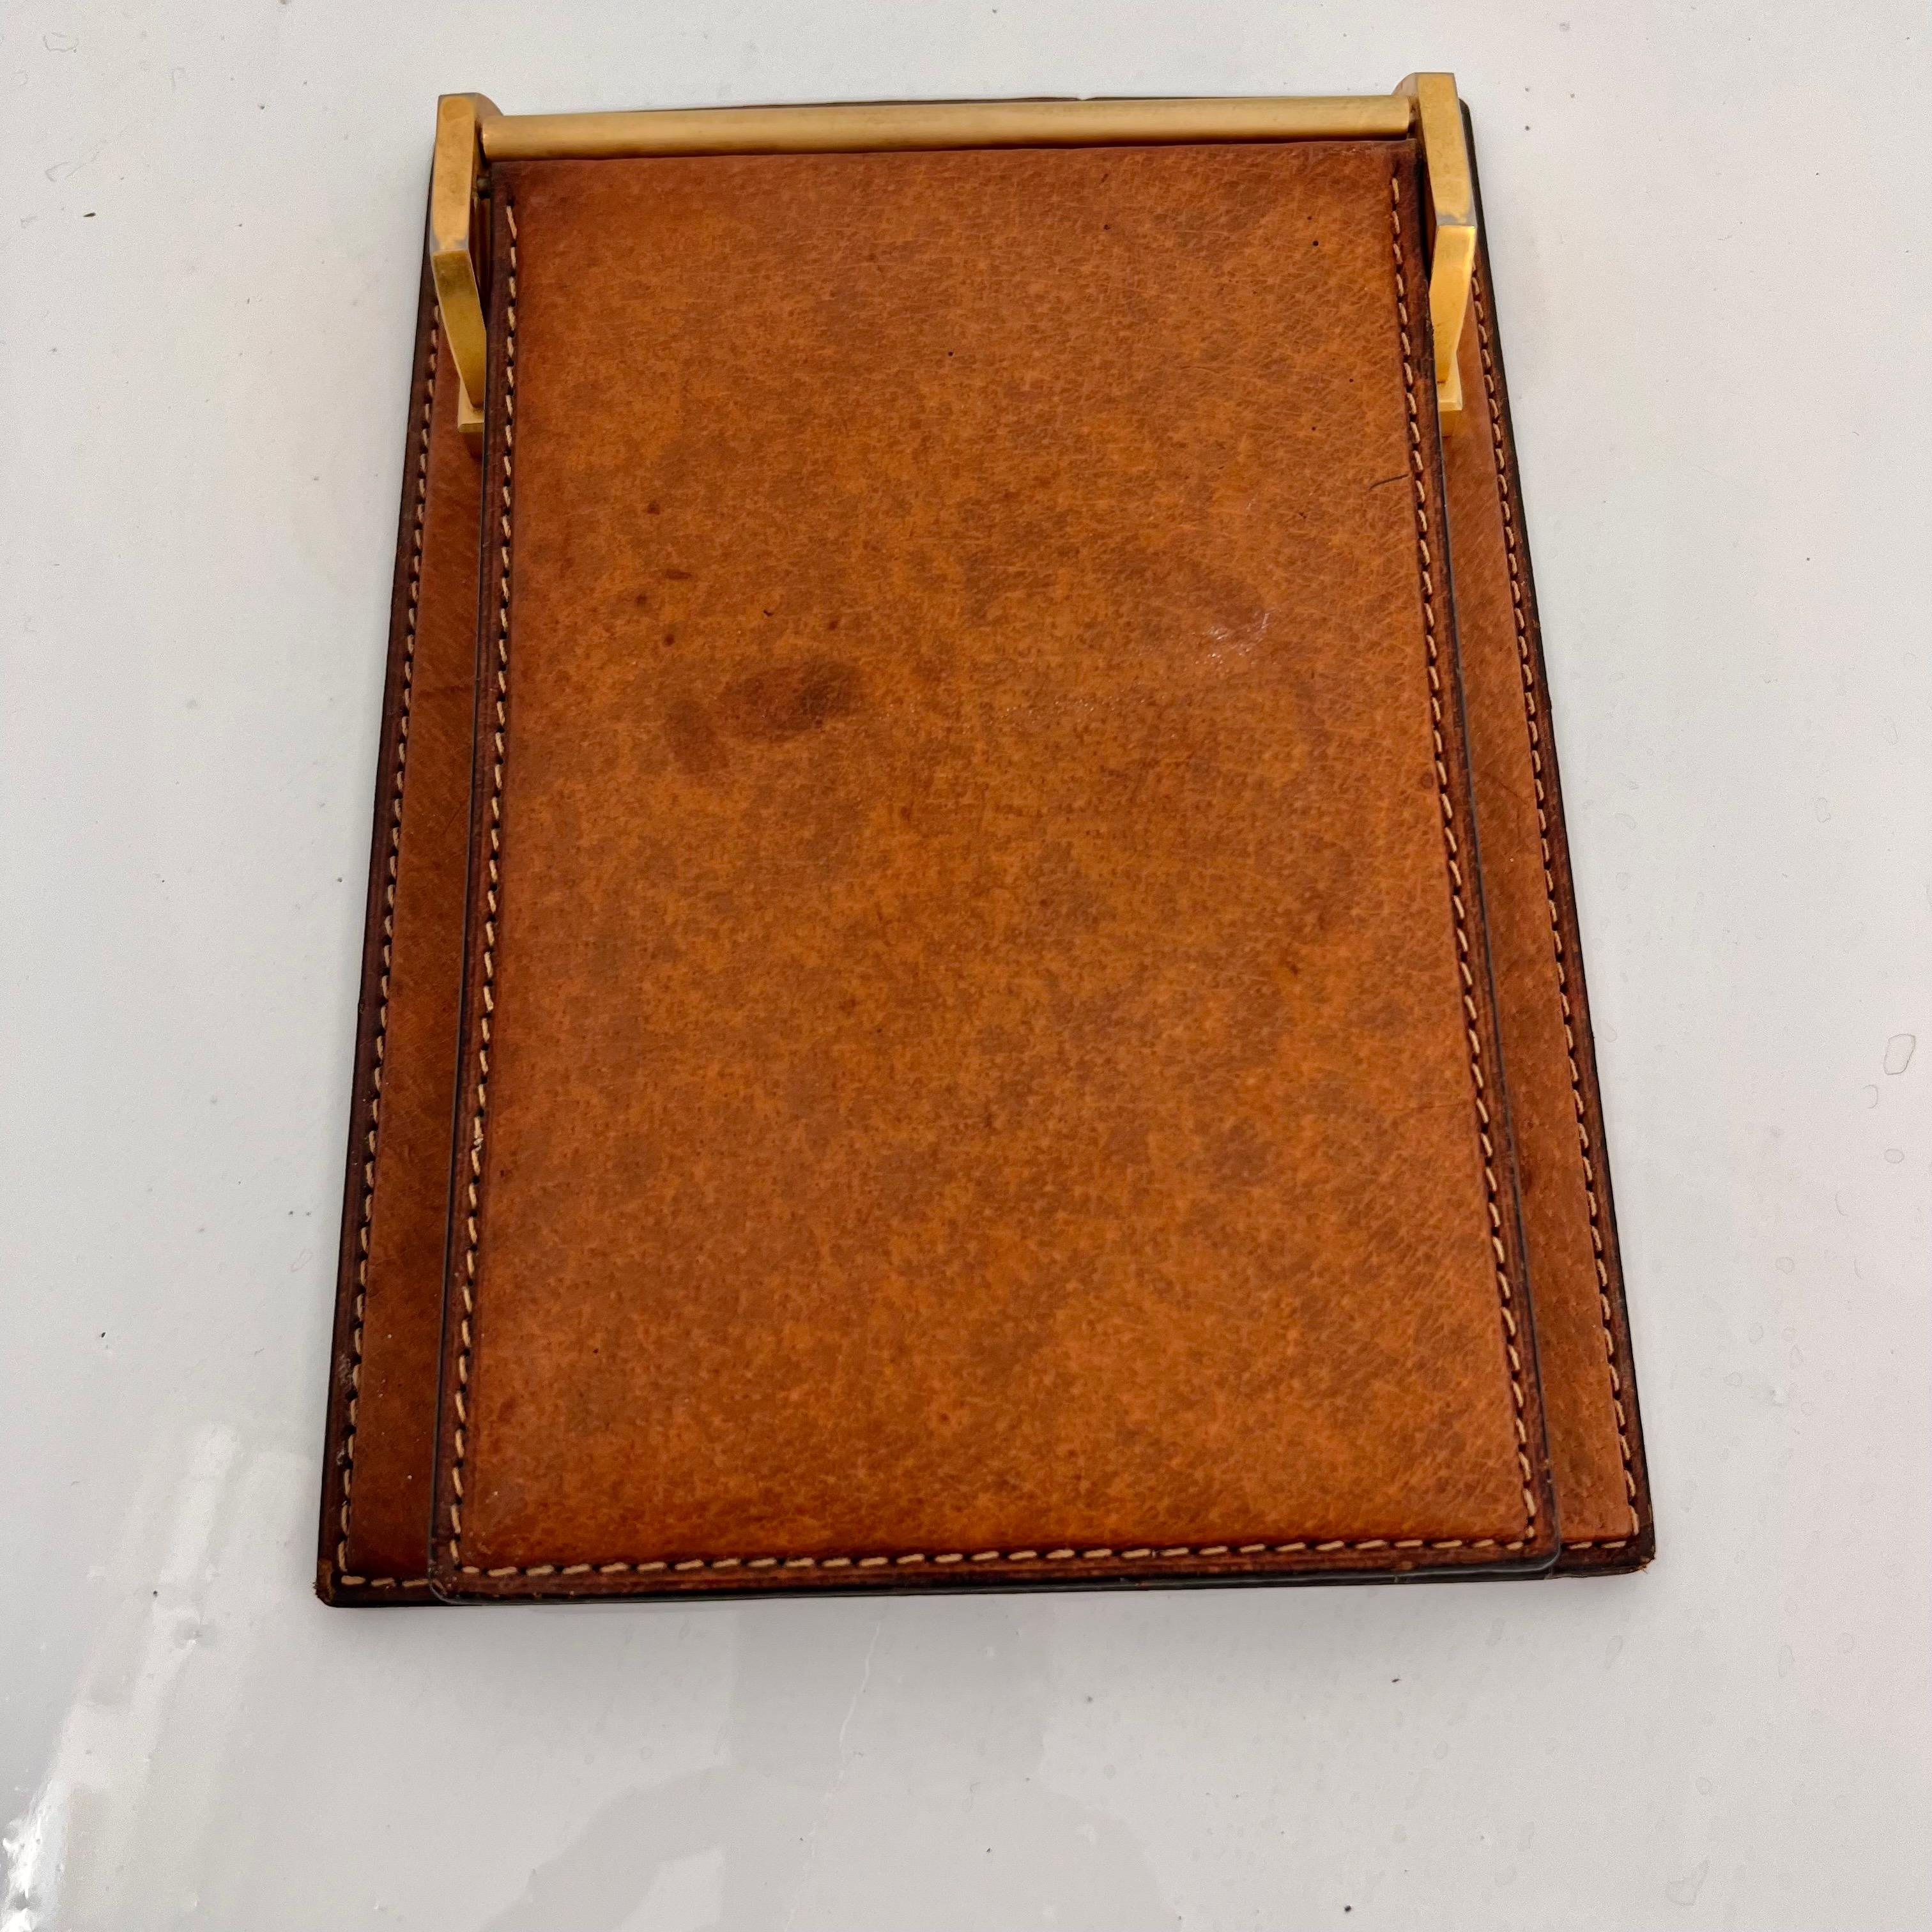 Handsome leather notepad by Gucci. Made in Italy, circa 1980s. Rich color to saddle leather with contrast stitching along the borders. Brass brackets holding leather flap. New 3